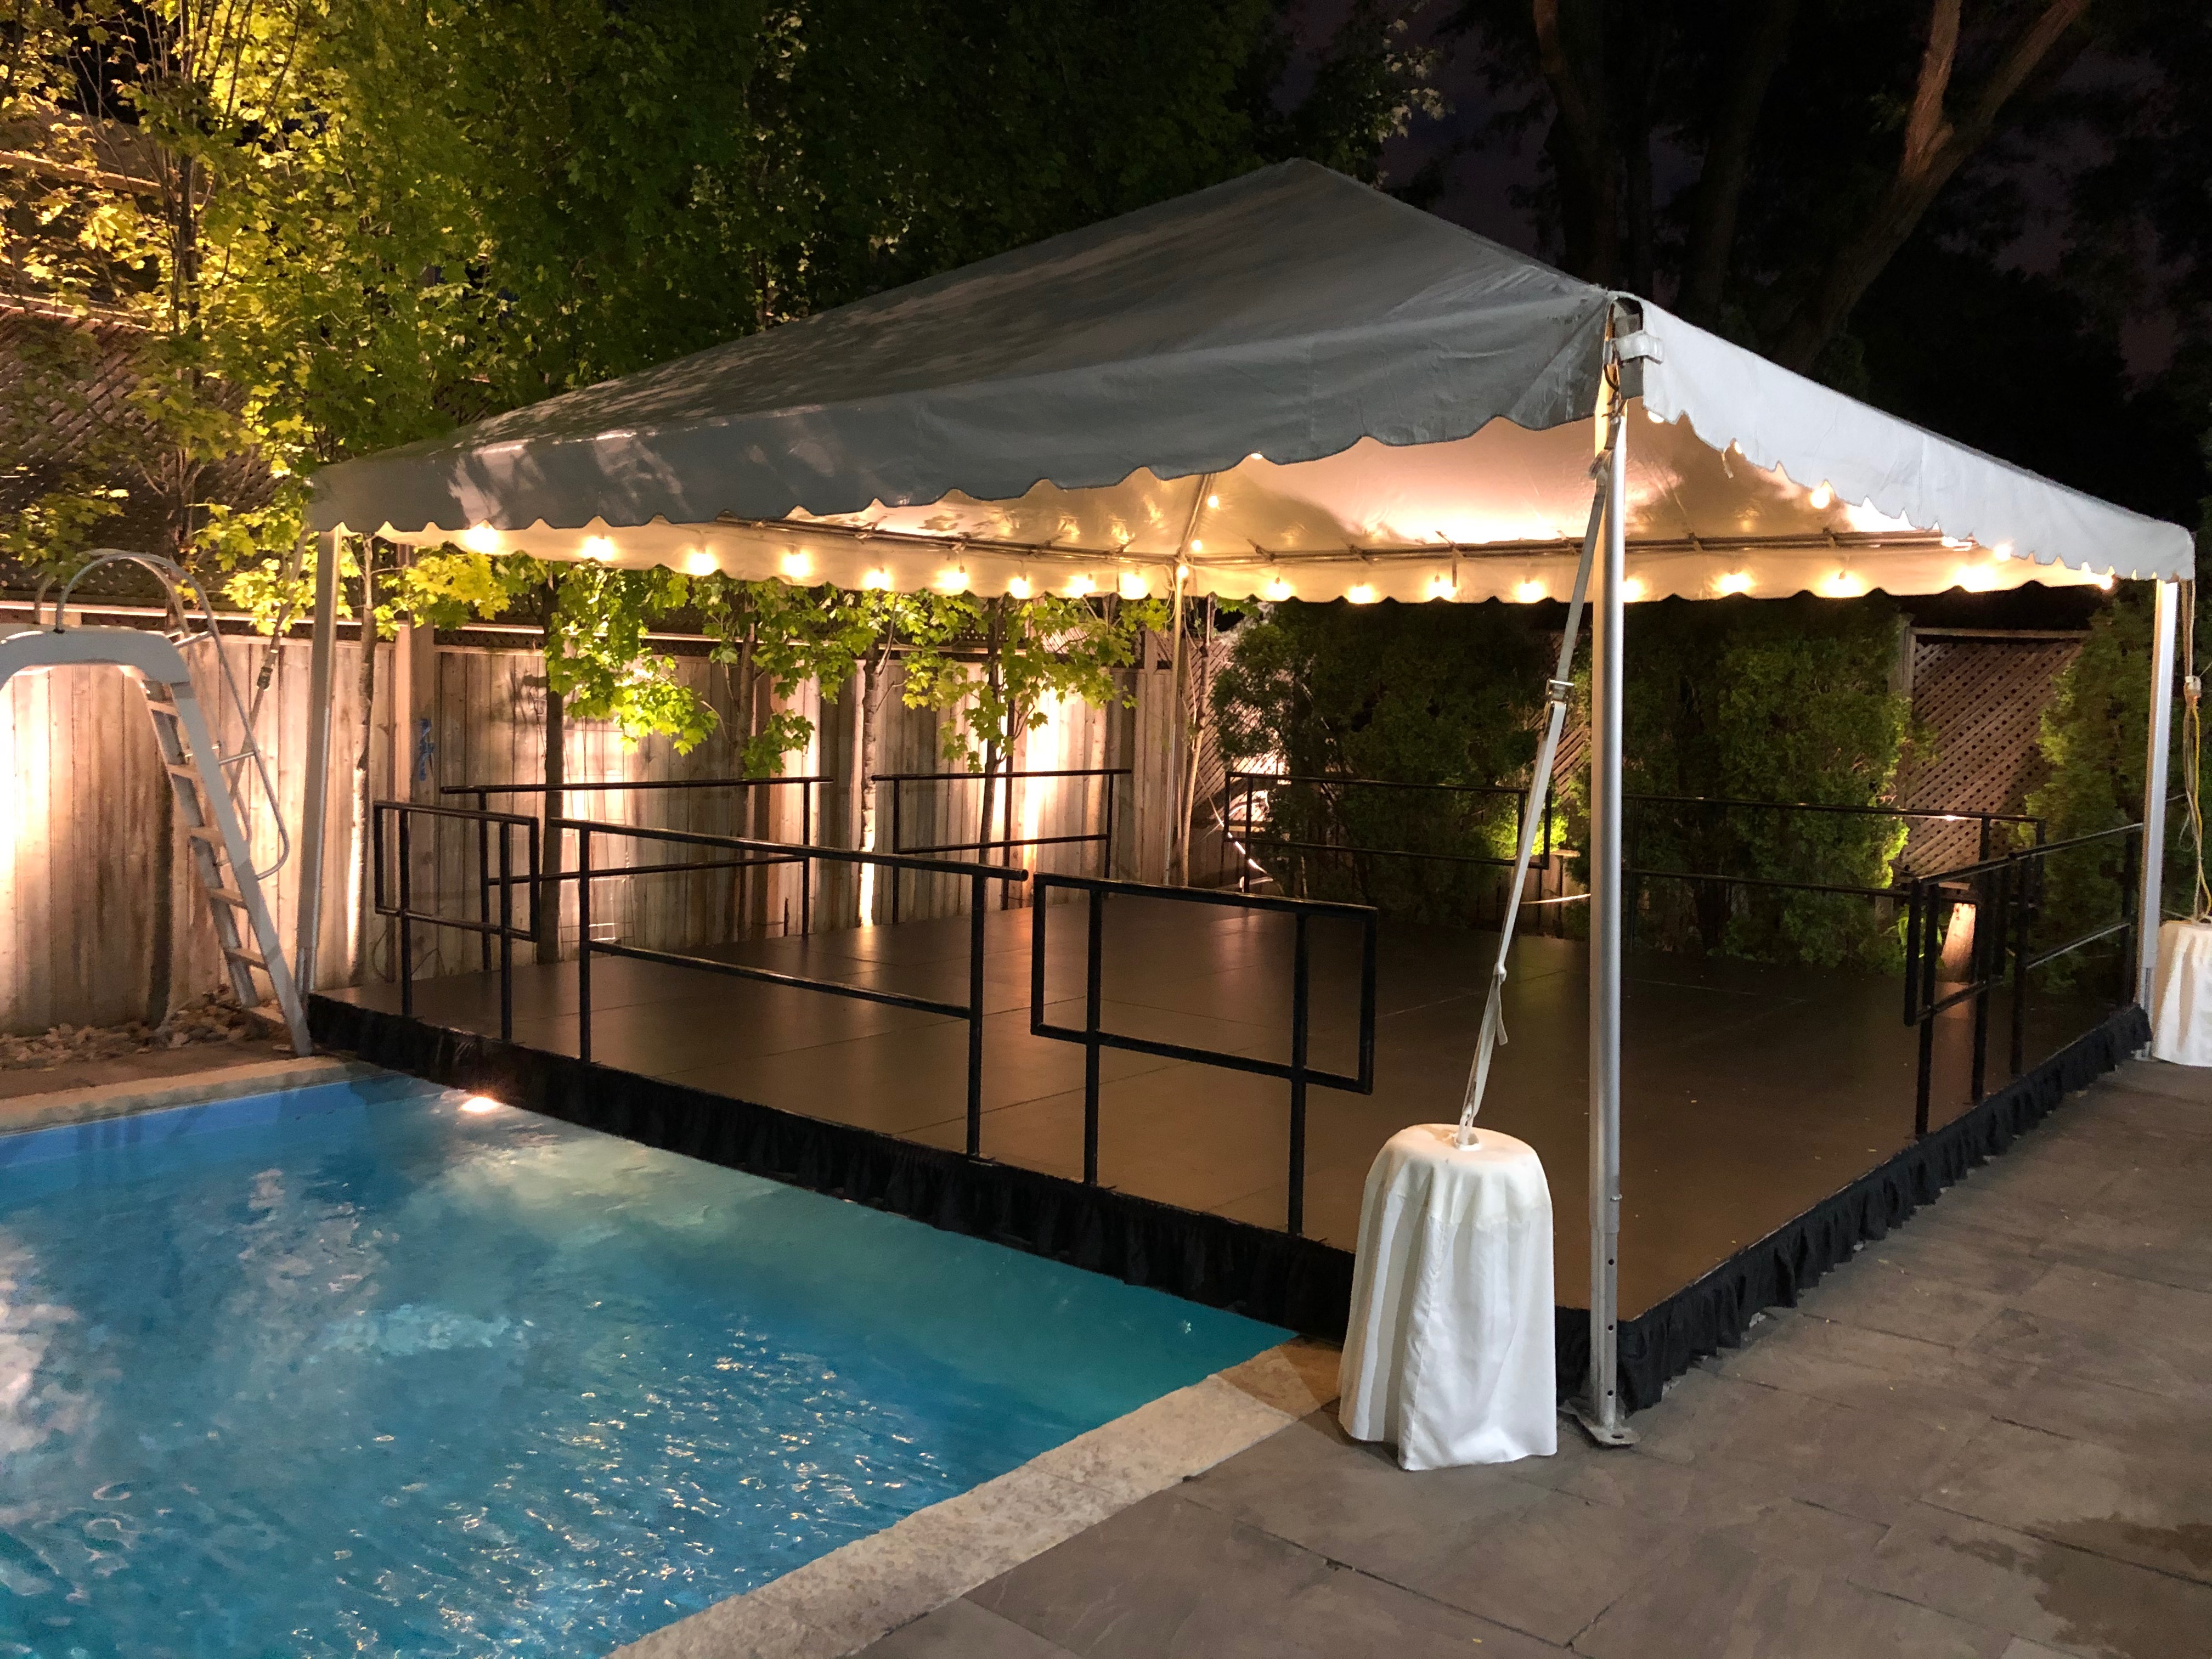 Outdoor Party Tents For Rent | Large White Tent Rentals